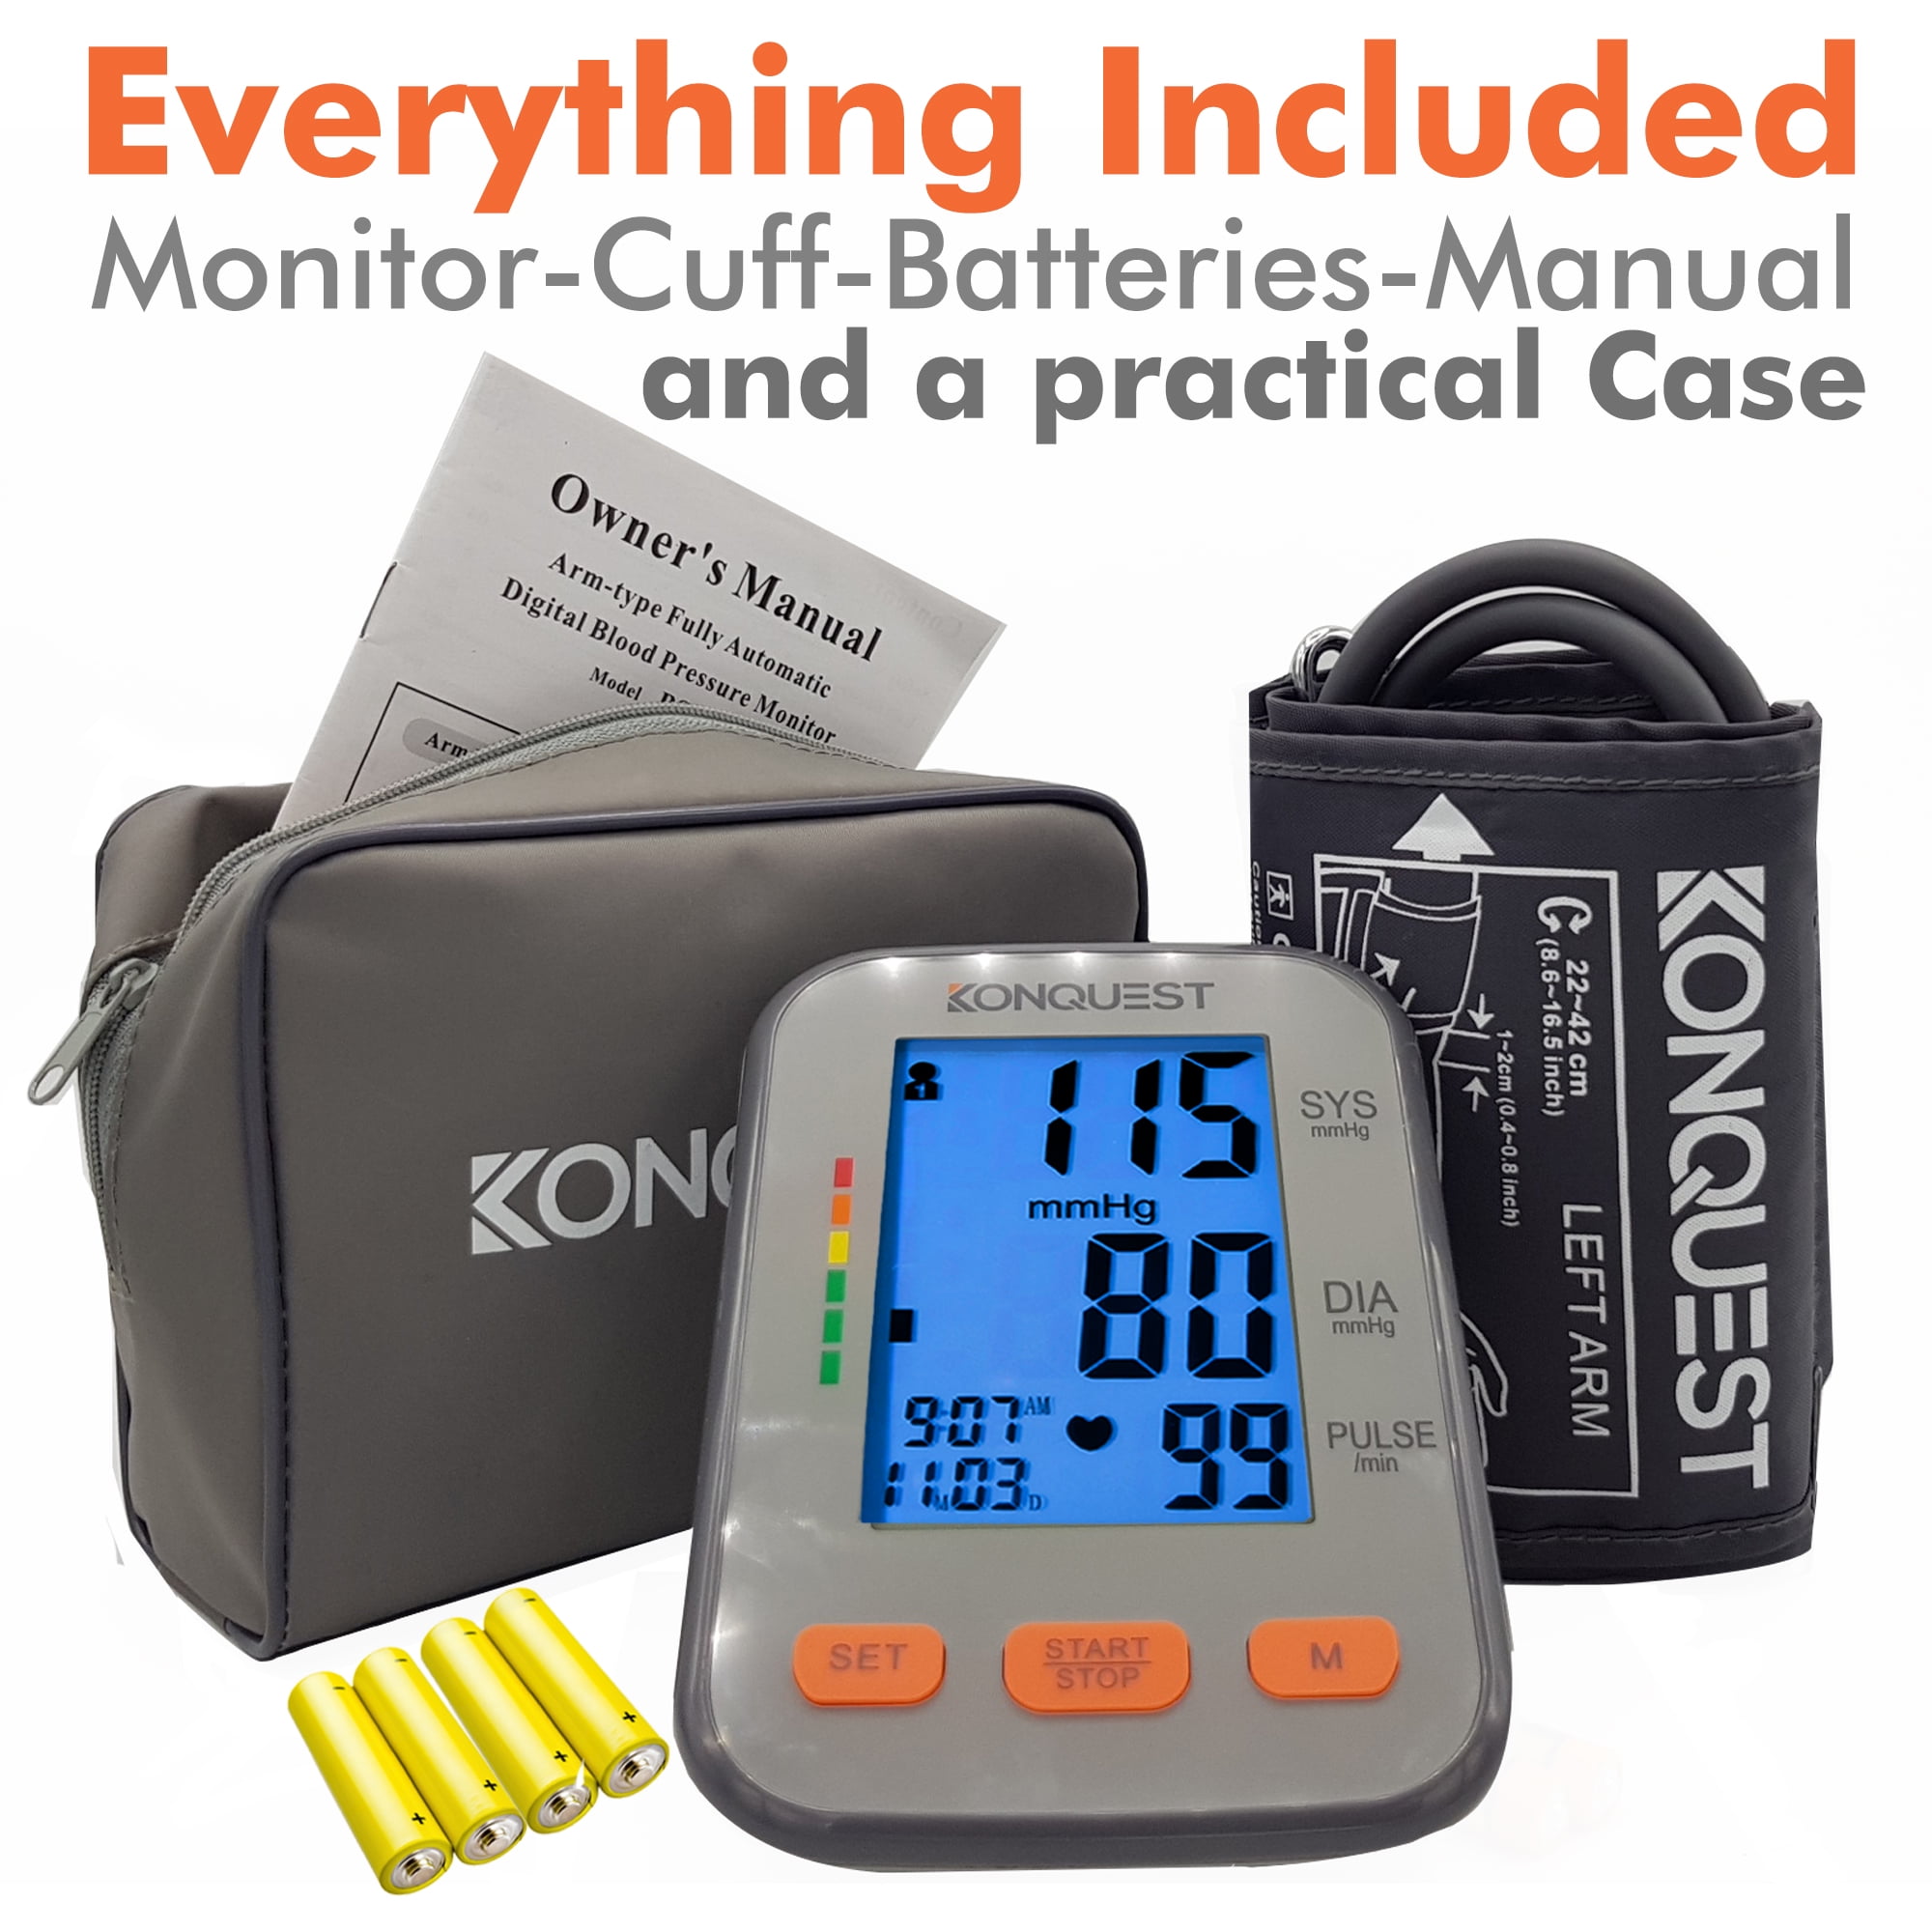  Konquest KBP-2910W Automatic Wrist Blood Pressure Monitor -  Accurate - Adjustable Cuff, Large Screen Display - Portable Case -  Irregular Heartbeat Detector - Tensiometro : Health & Household